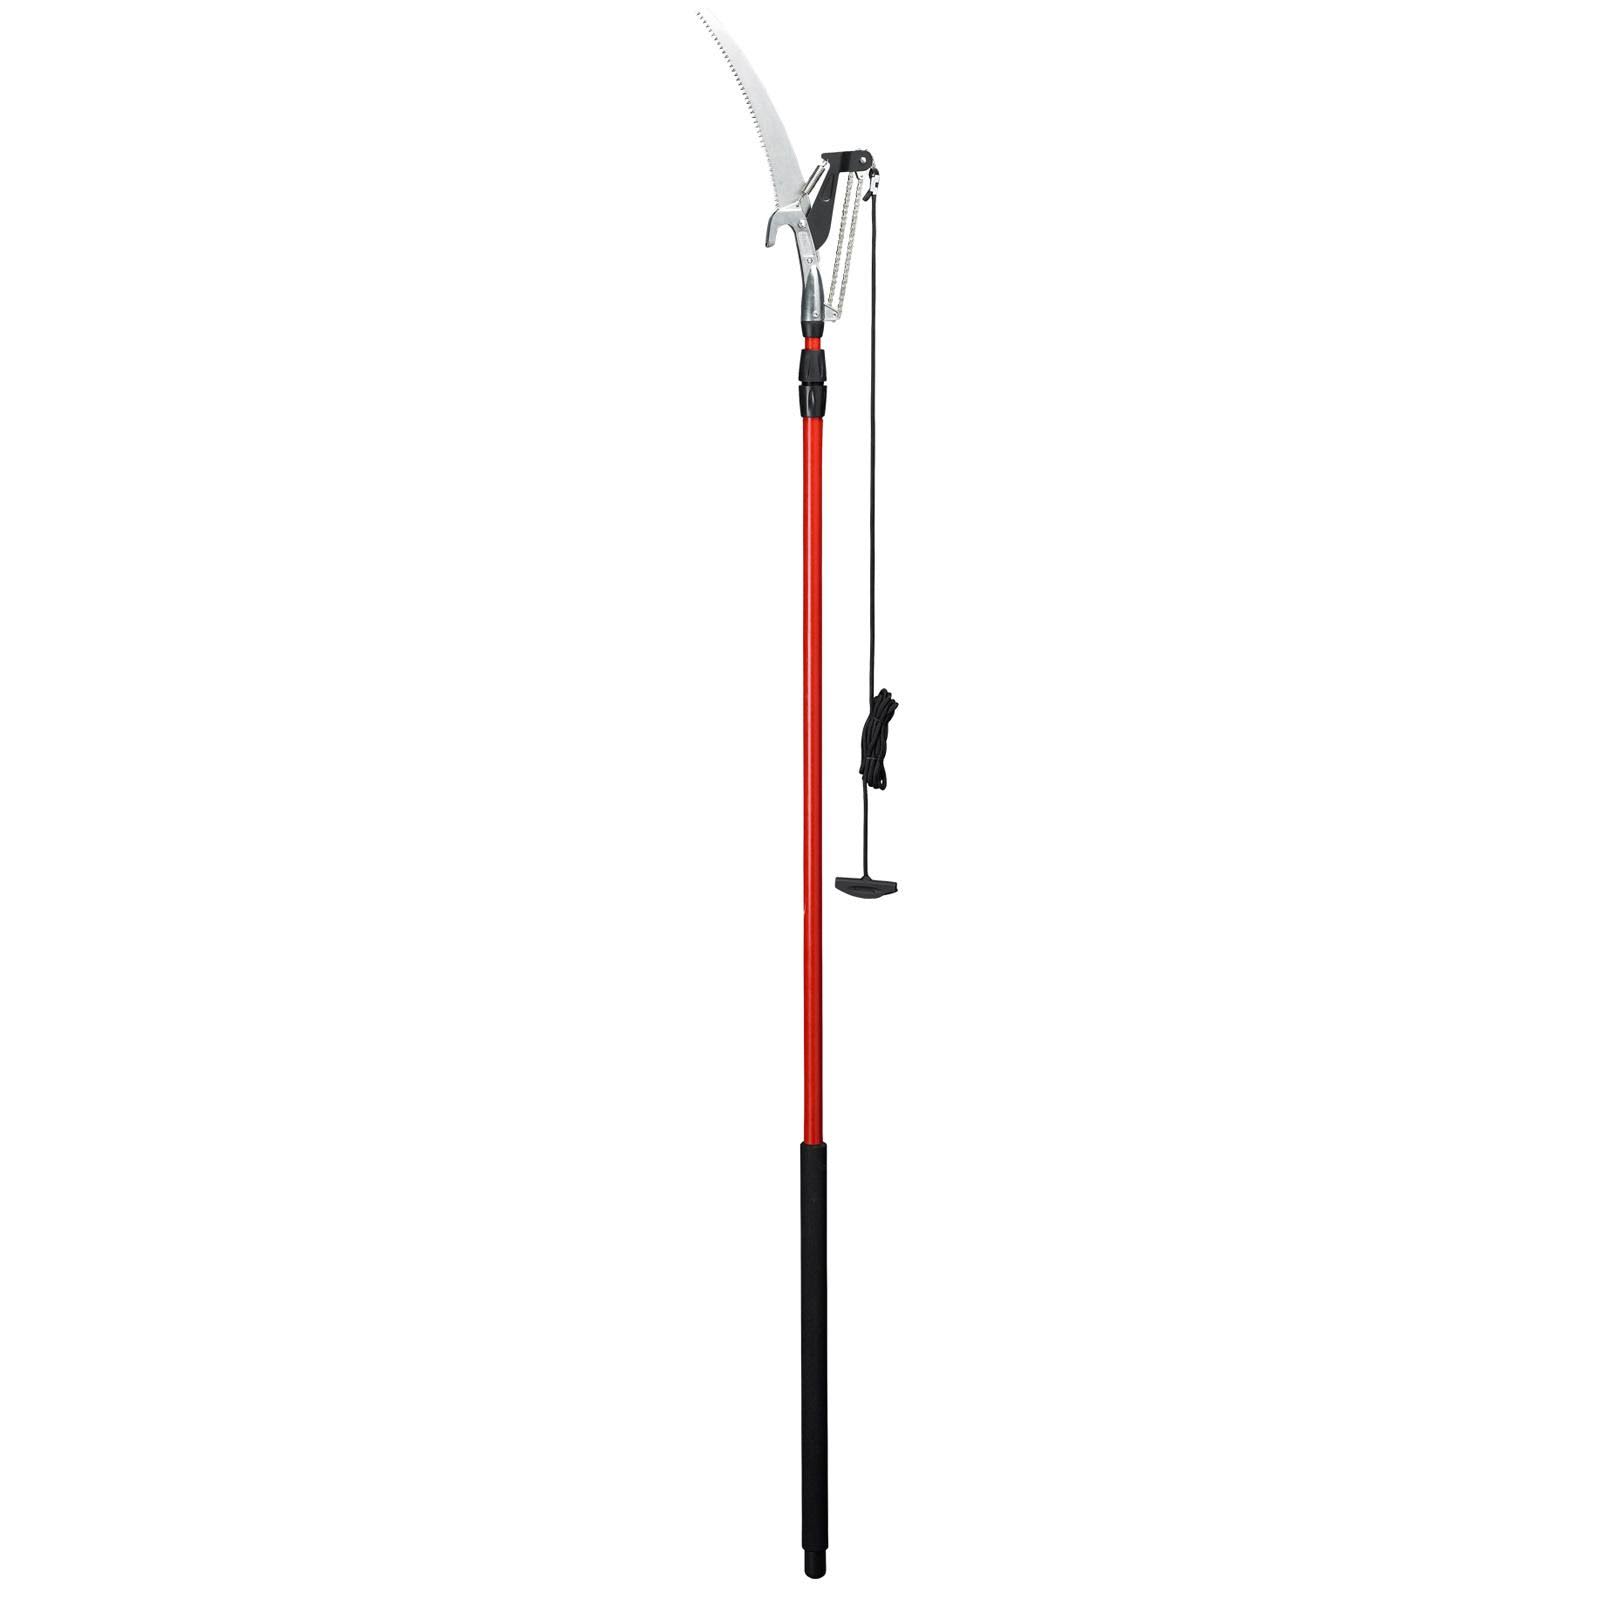 Corona TP 6870 Dual Compound Action Tree Pruner - 14'